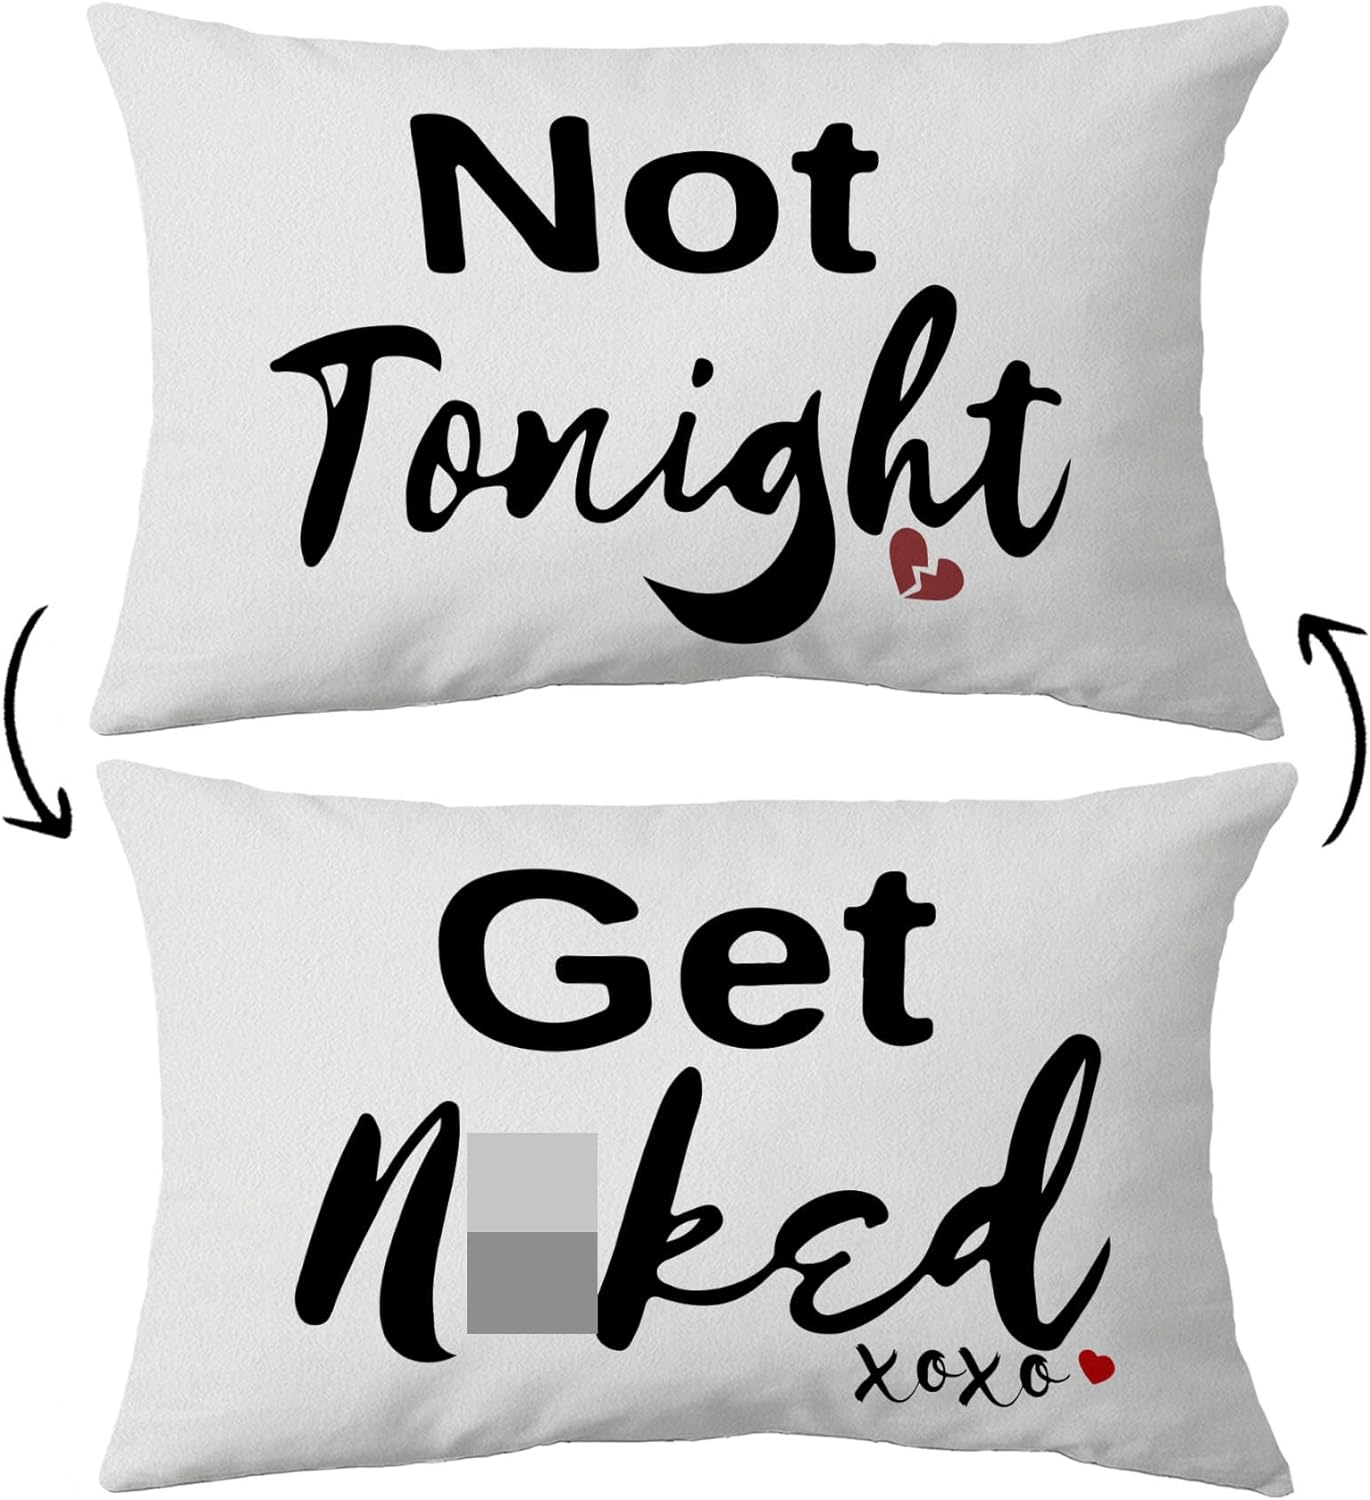 voatok's funny not tonight or get nxxed reversible white throw pillow case best christmas gifts for a lady who is newly married